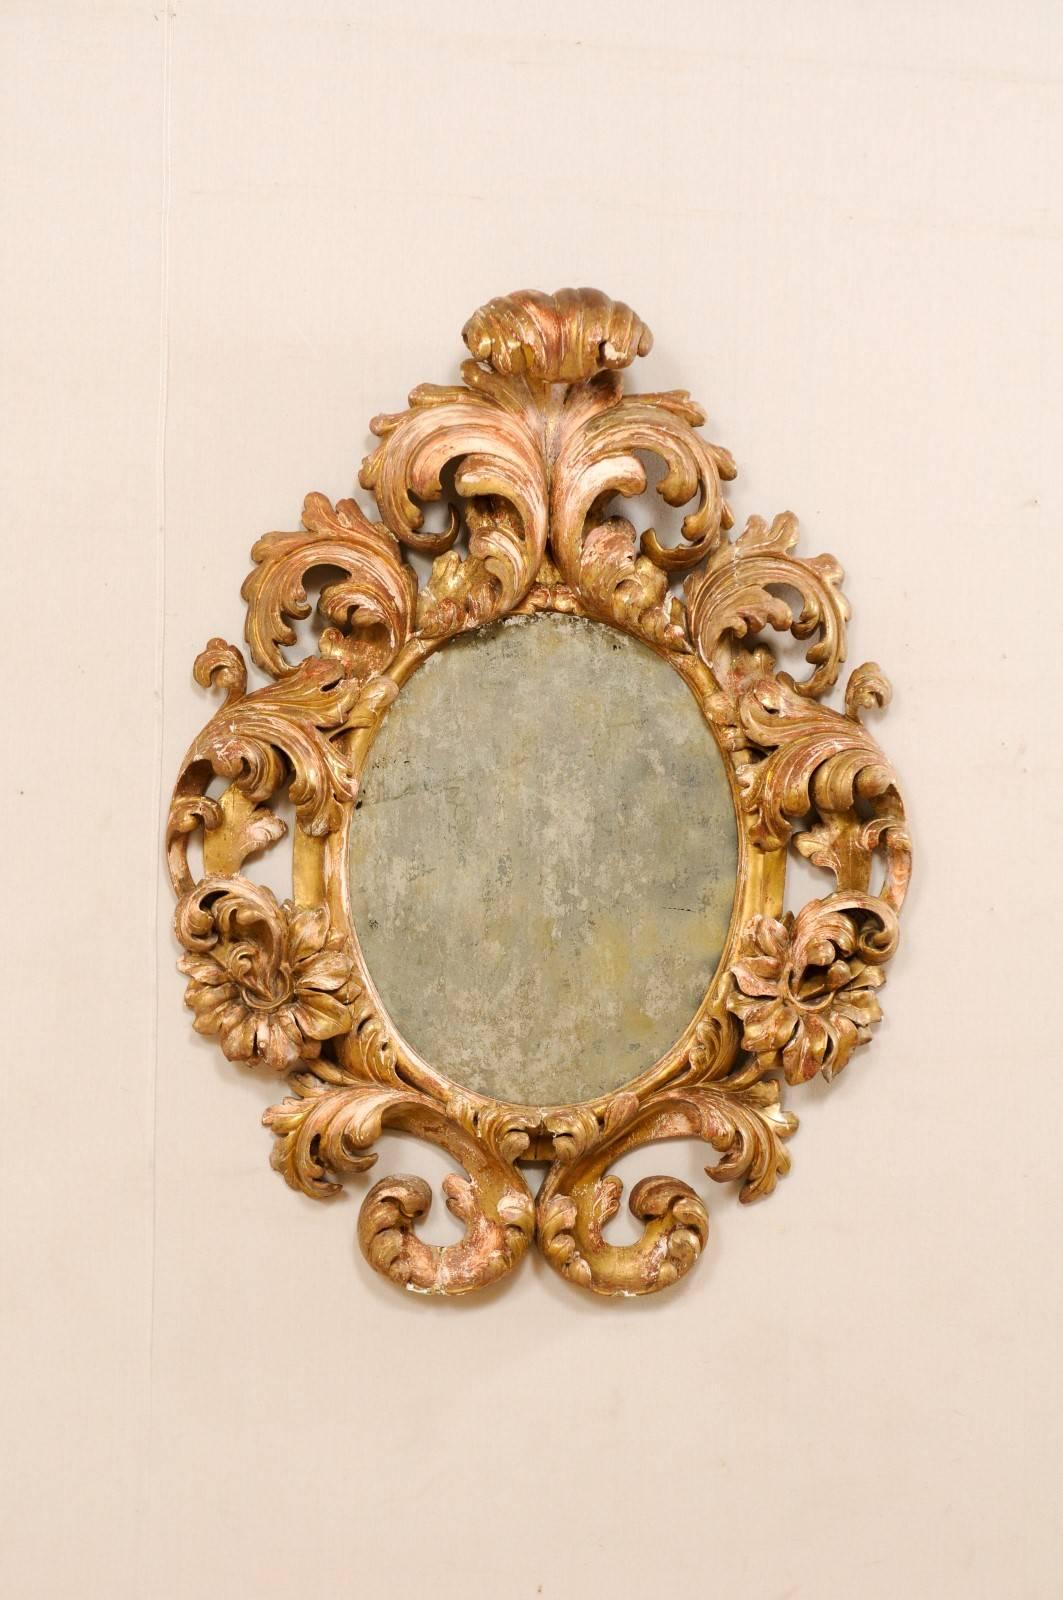 An Italian 18th century carved acanthus leaf mirror. This elaborate antique Italian mirror, circa 1740, features a richly carved ornate acanthus leaf surround with an oblong, oval shape. The carved details are spectacular, the scrolling leaves are